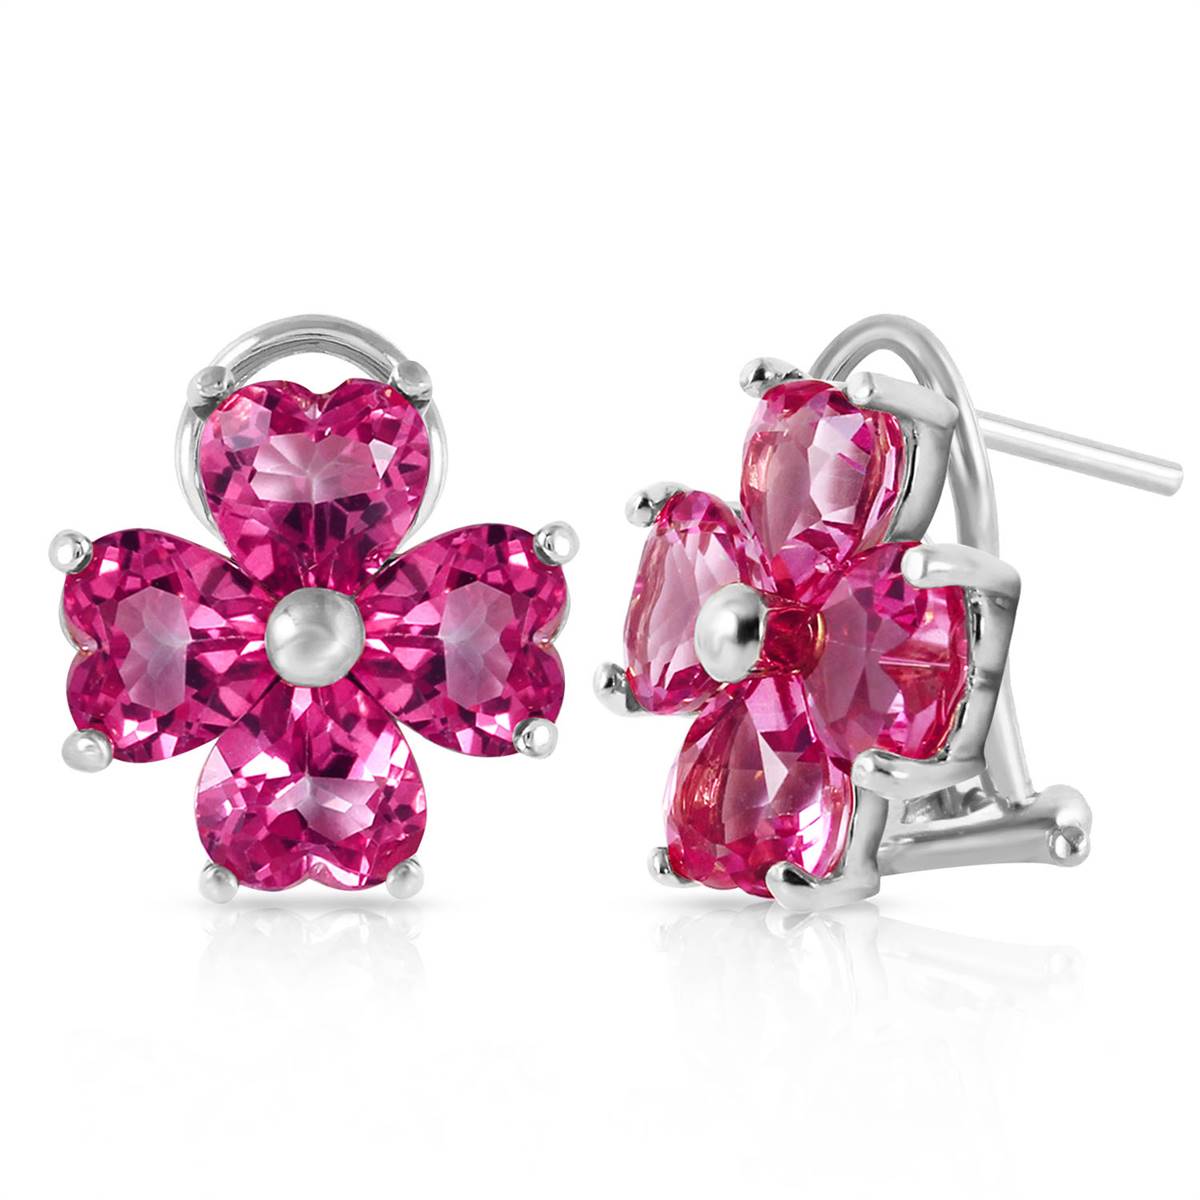 7.6 Carat 14K Solid White Gold French Clips Earrings Natural Pink Topaz